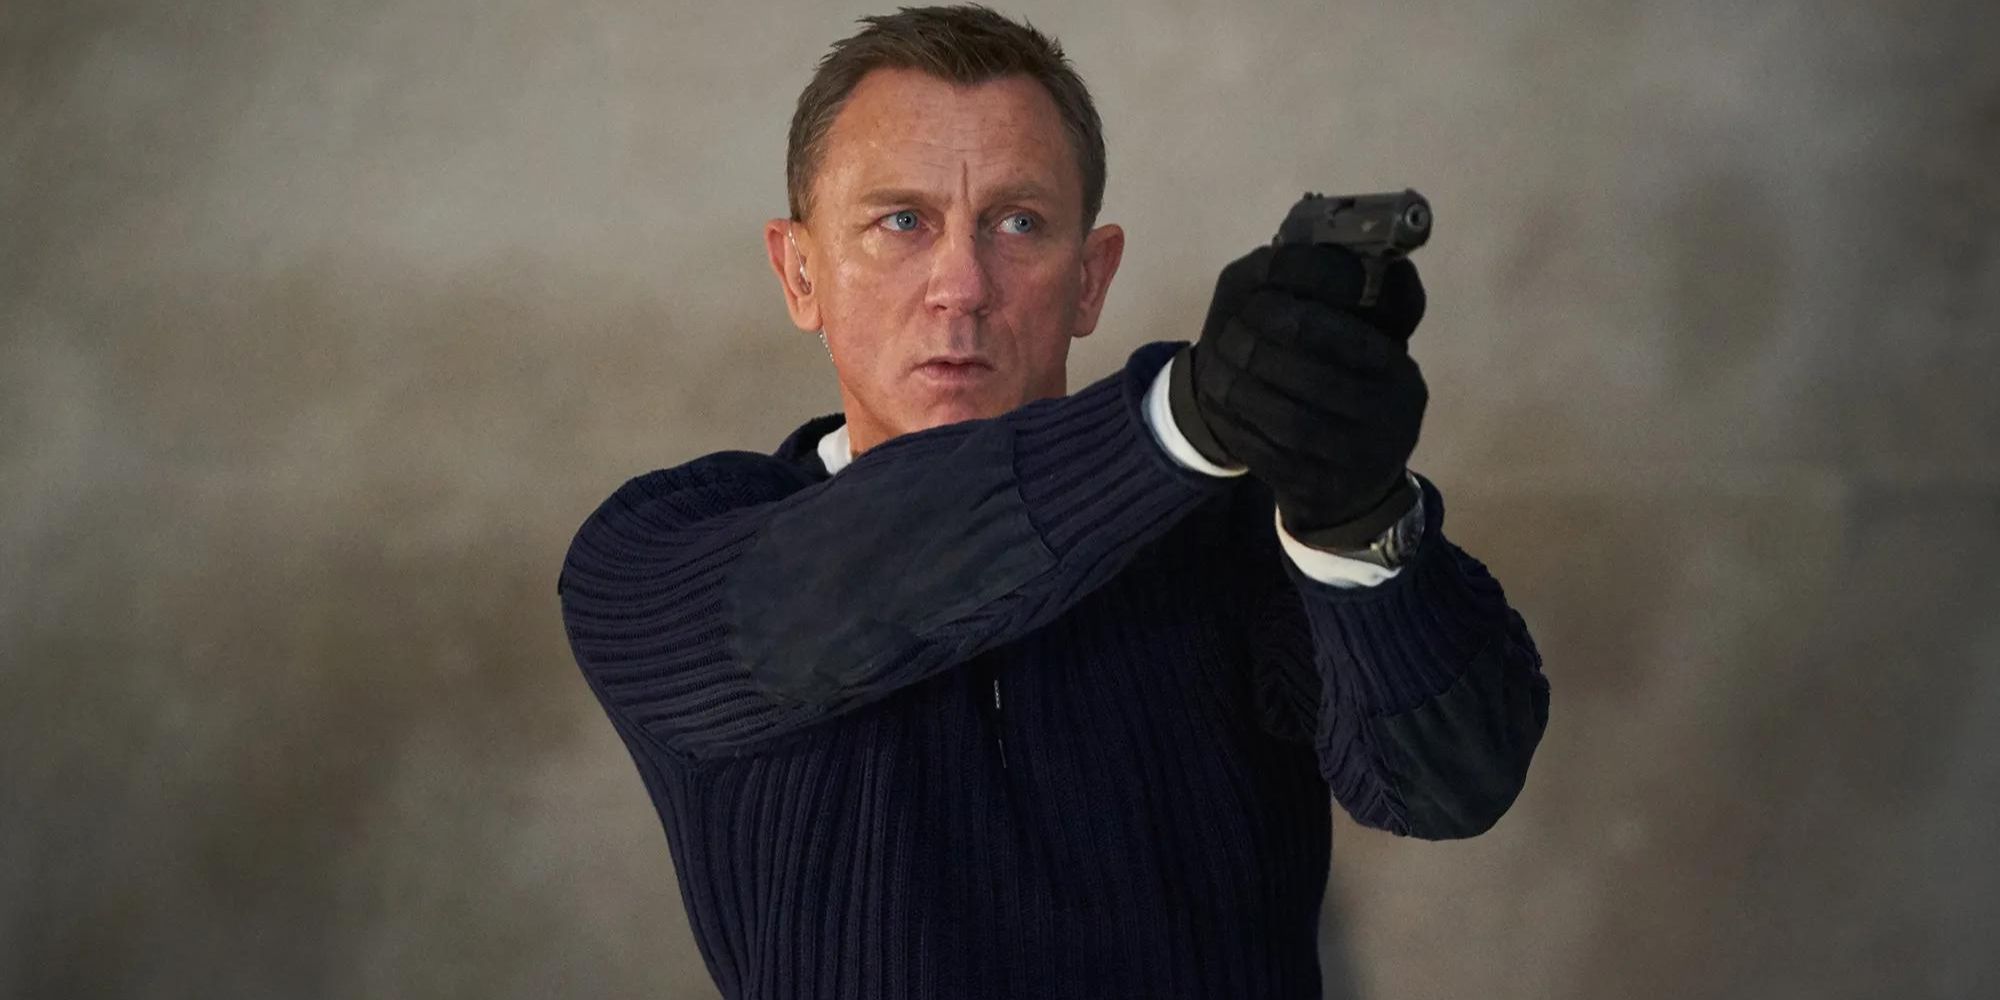 James Bond (Daniel Craig) aims his pistol at an unseen foe in No Time to Die